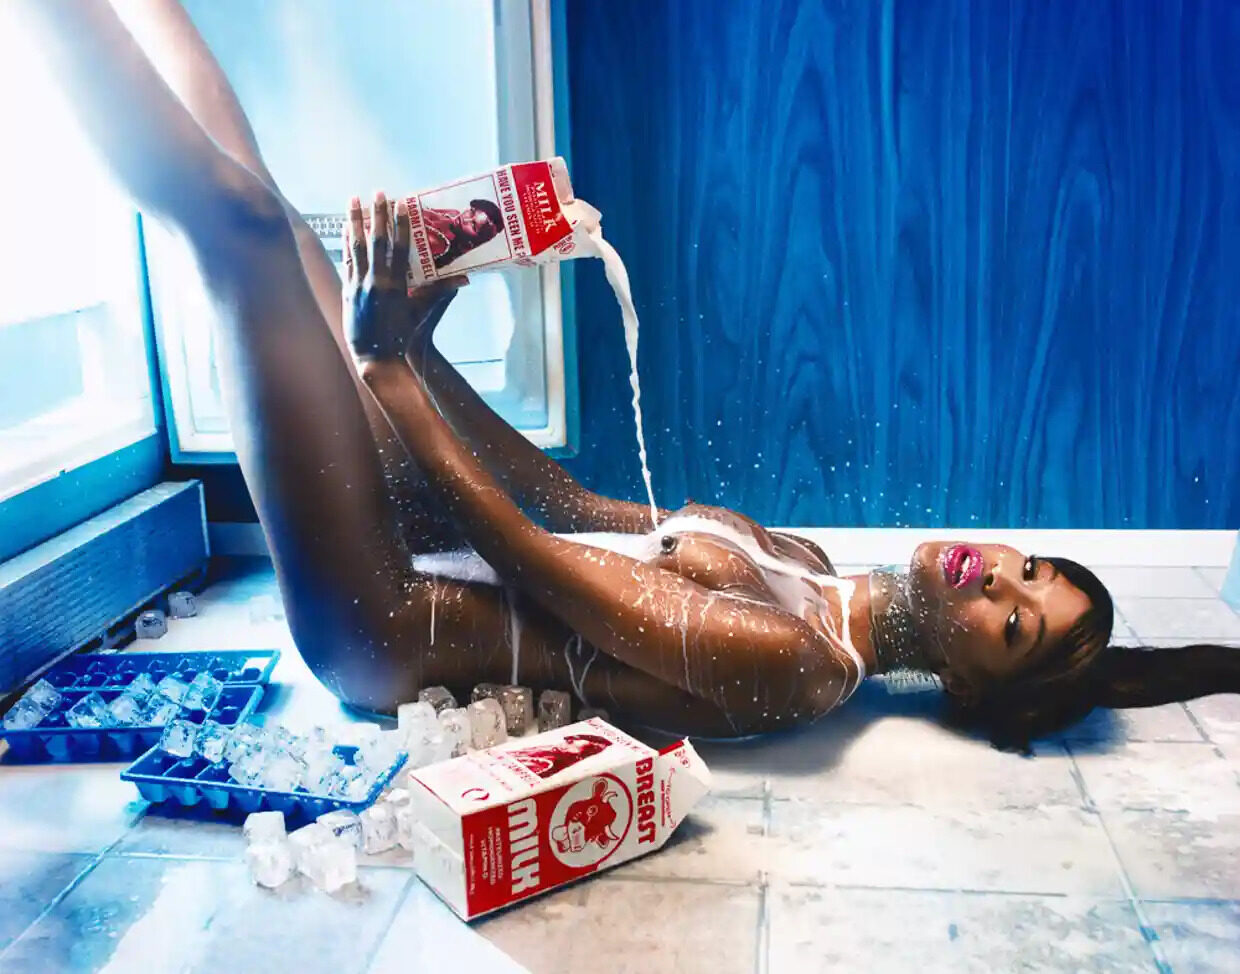 David LaChapelle: ‘I’ve never seen what I do as objectification’ | 1